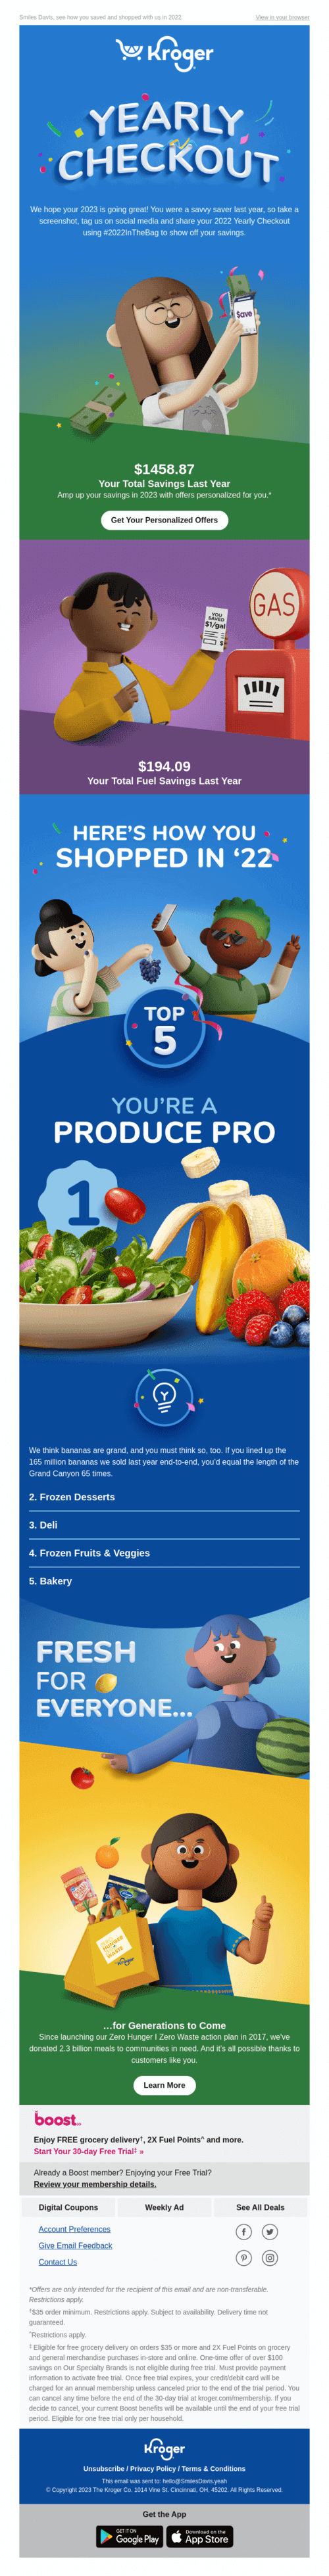 A Kroger email with user statistics such as savings and top products bought throughout the year